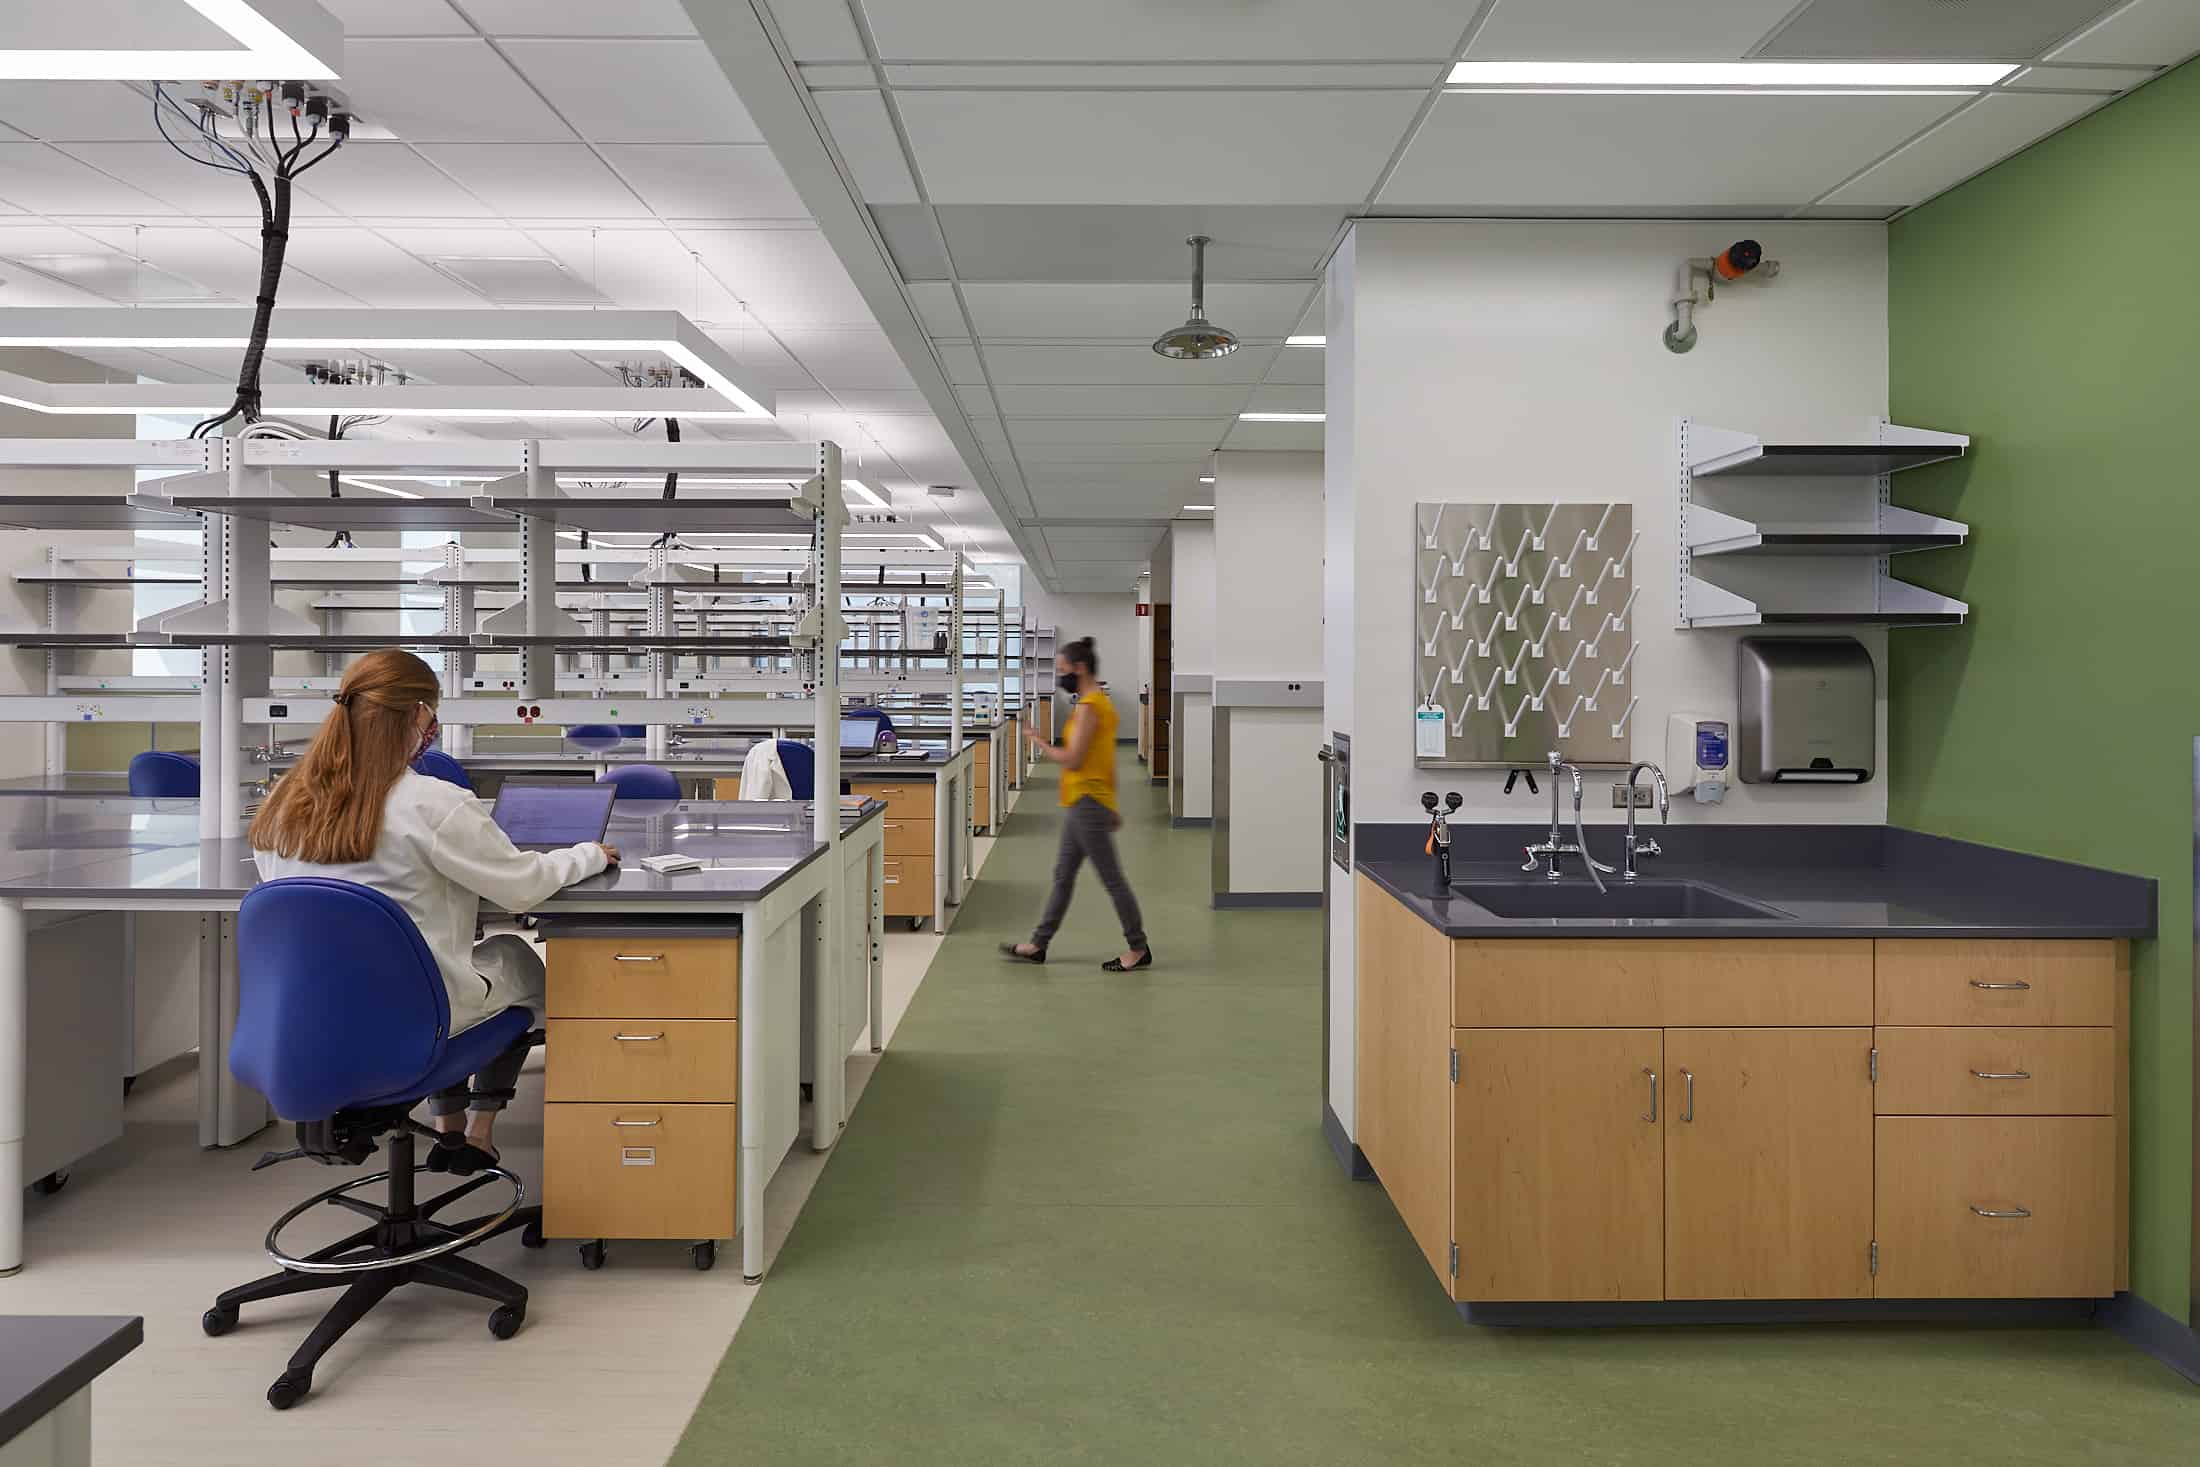 This photograph features a laboratory within the Duke University Medical Science Research Building.